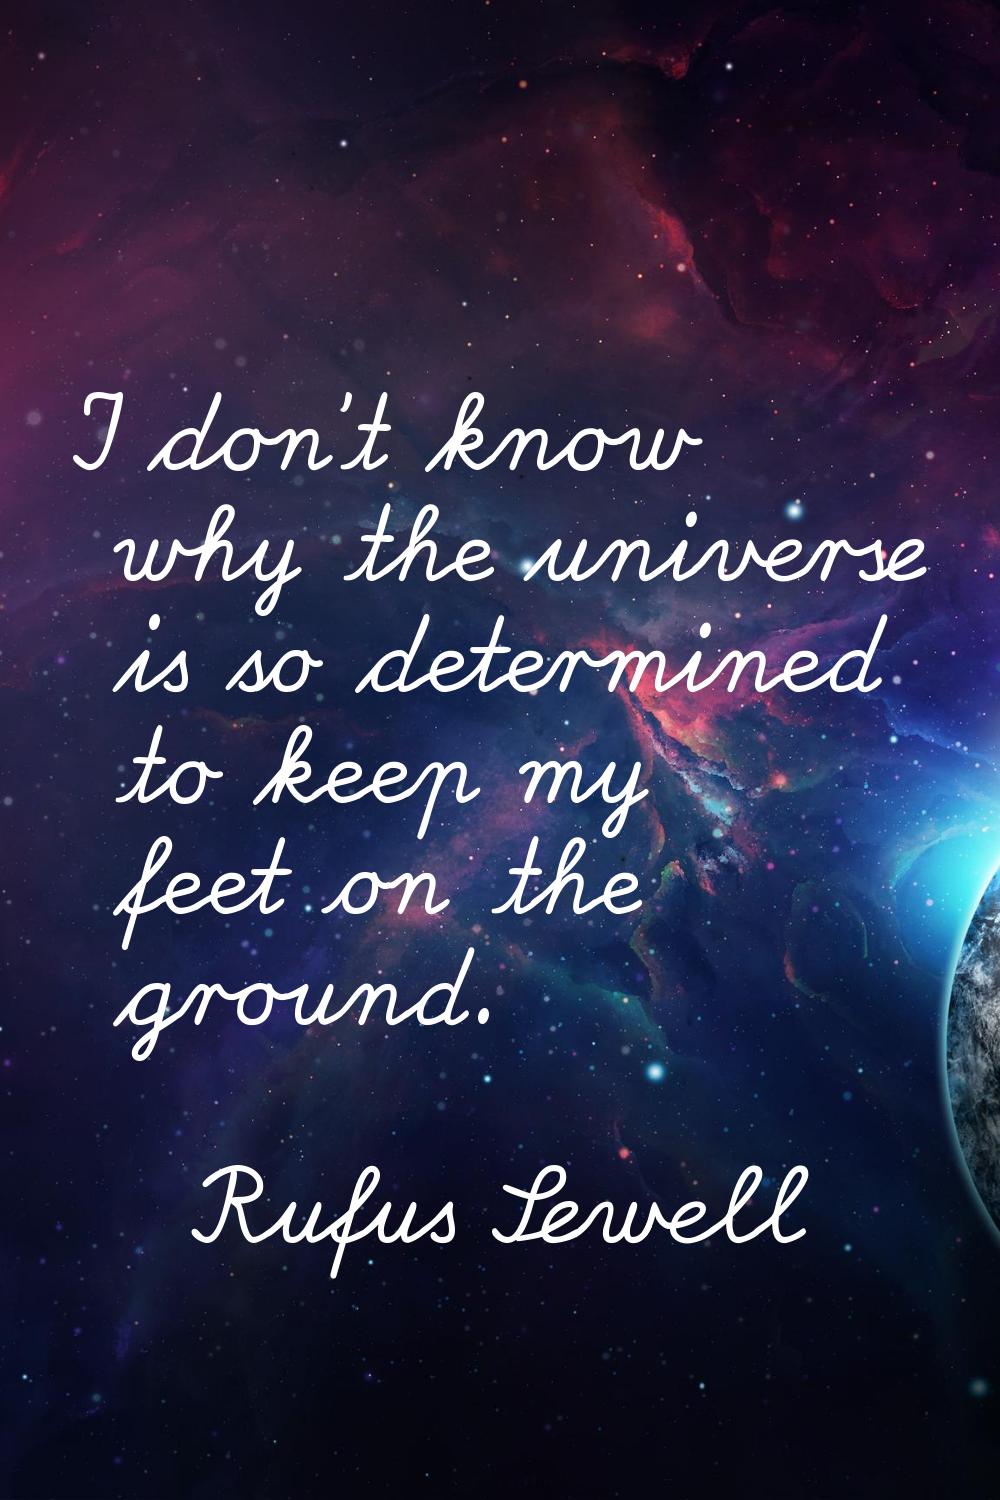 I don't know why the universe is so determined to keep my feet on the ground.